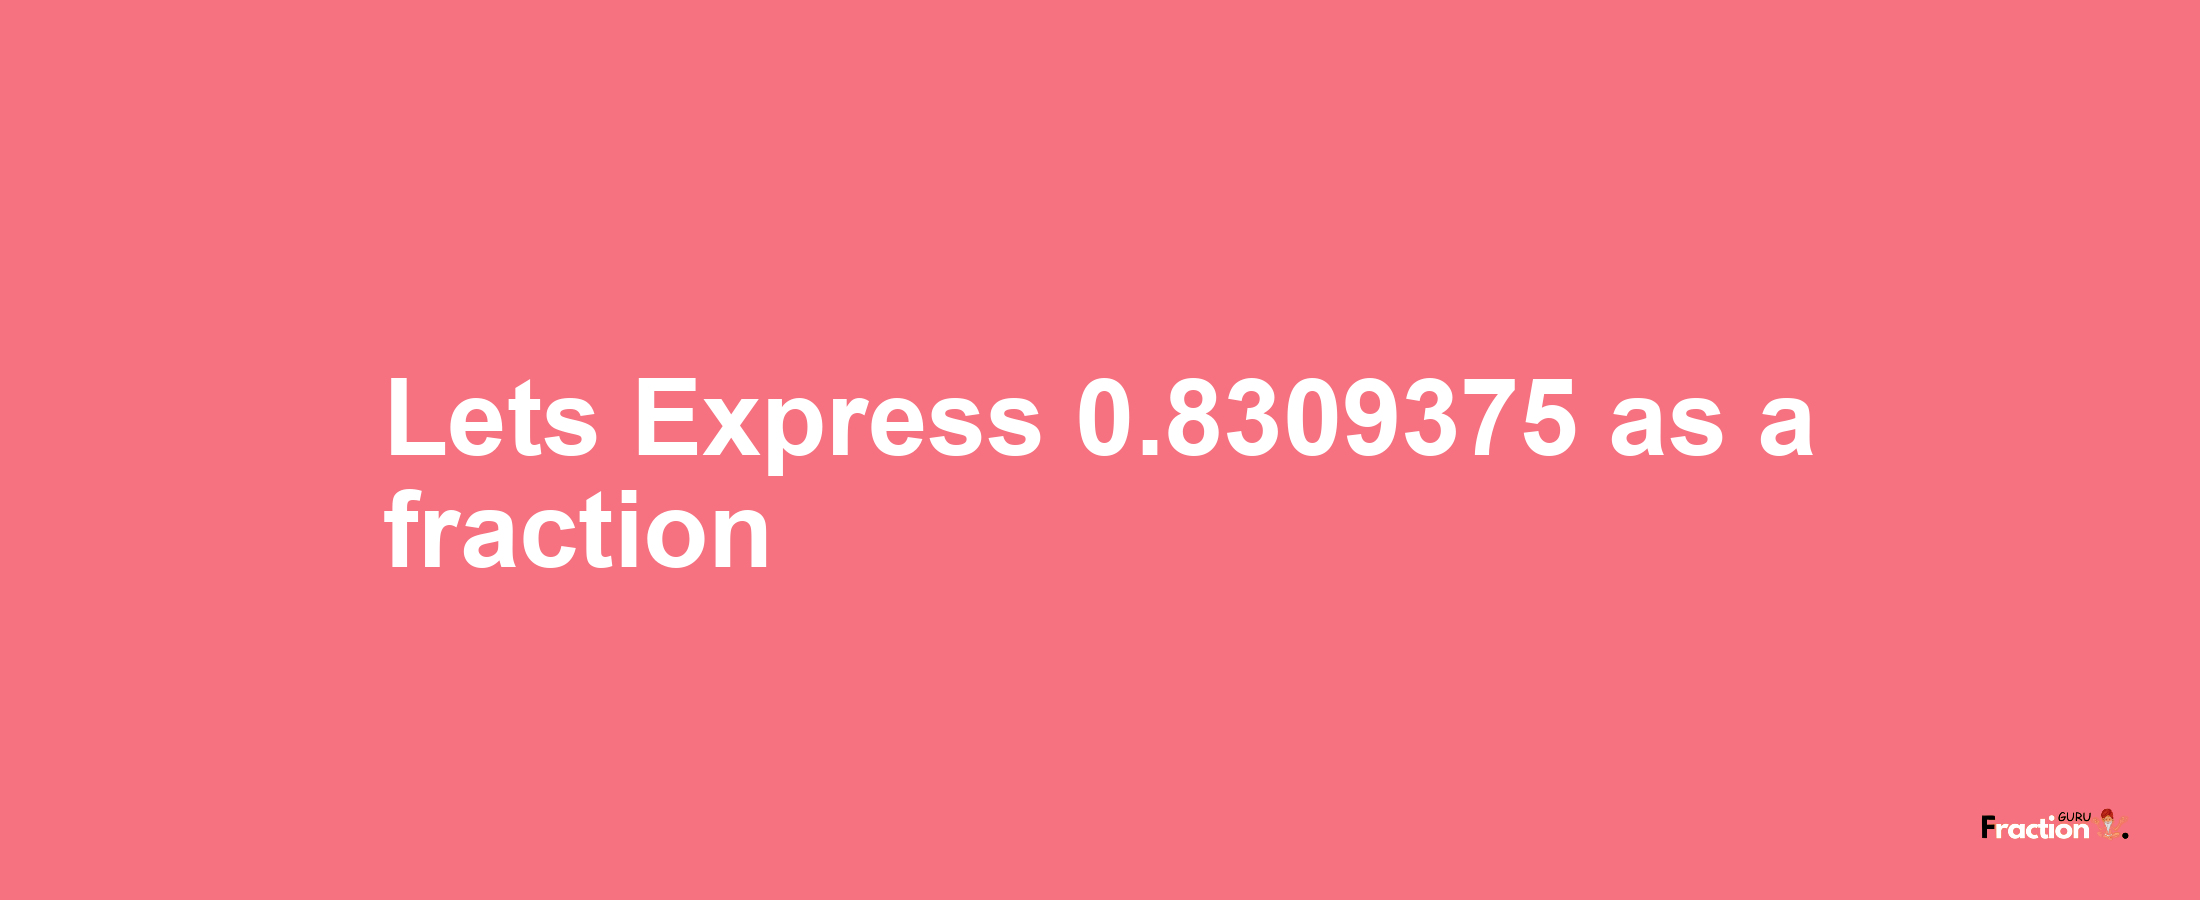 Lets Express 0.8309375 as afraction